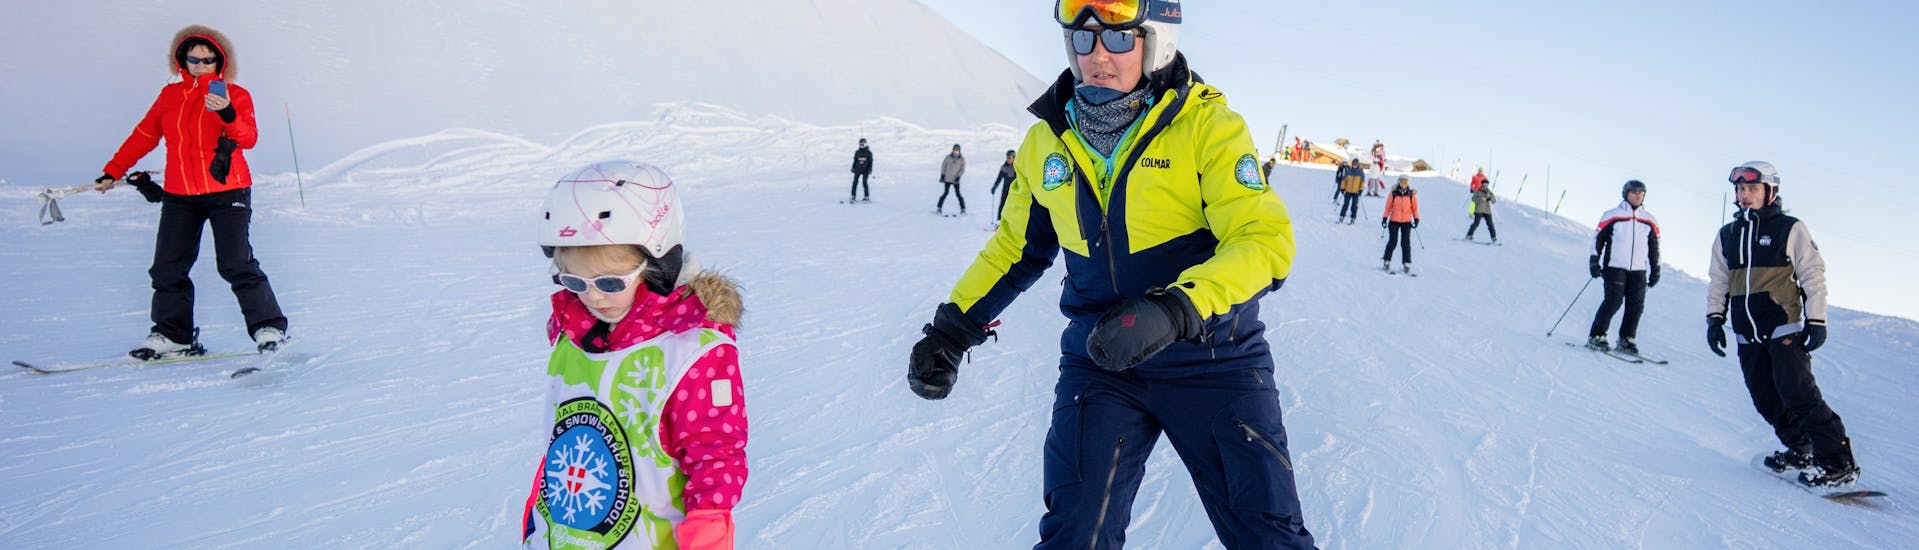 A kid is skiing down a slope in confidence thanks to her Private Ski Lessons for Kids of All Levels with Prosneige Tignes.